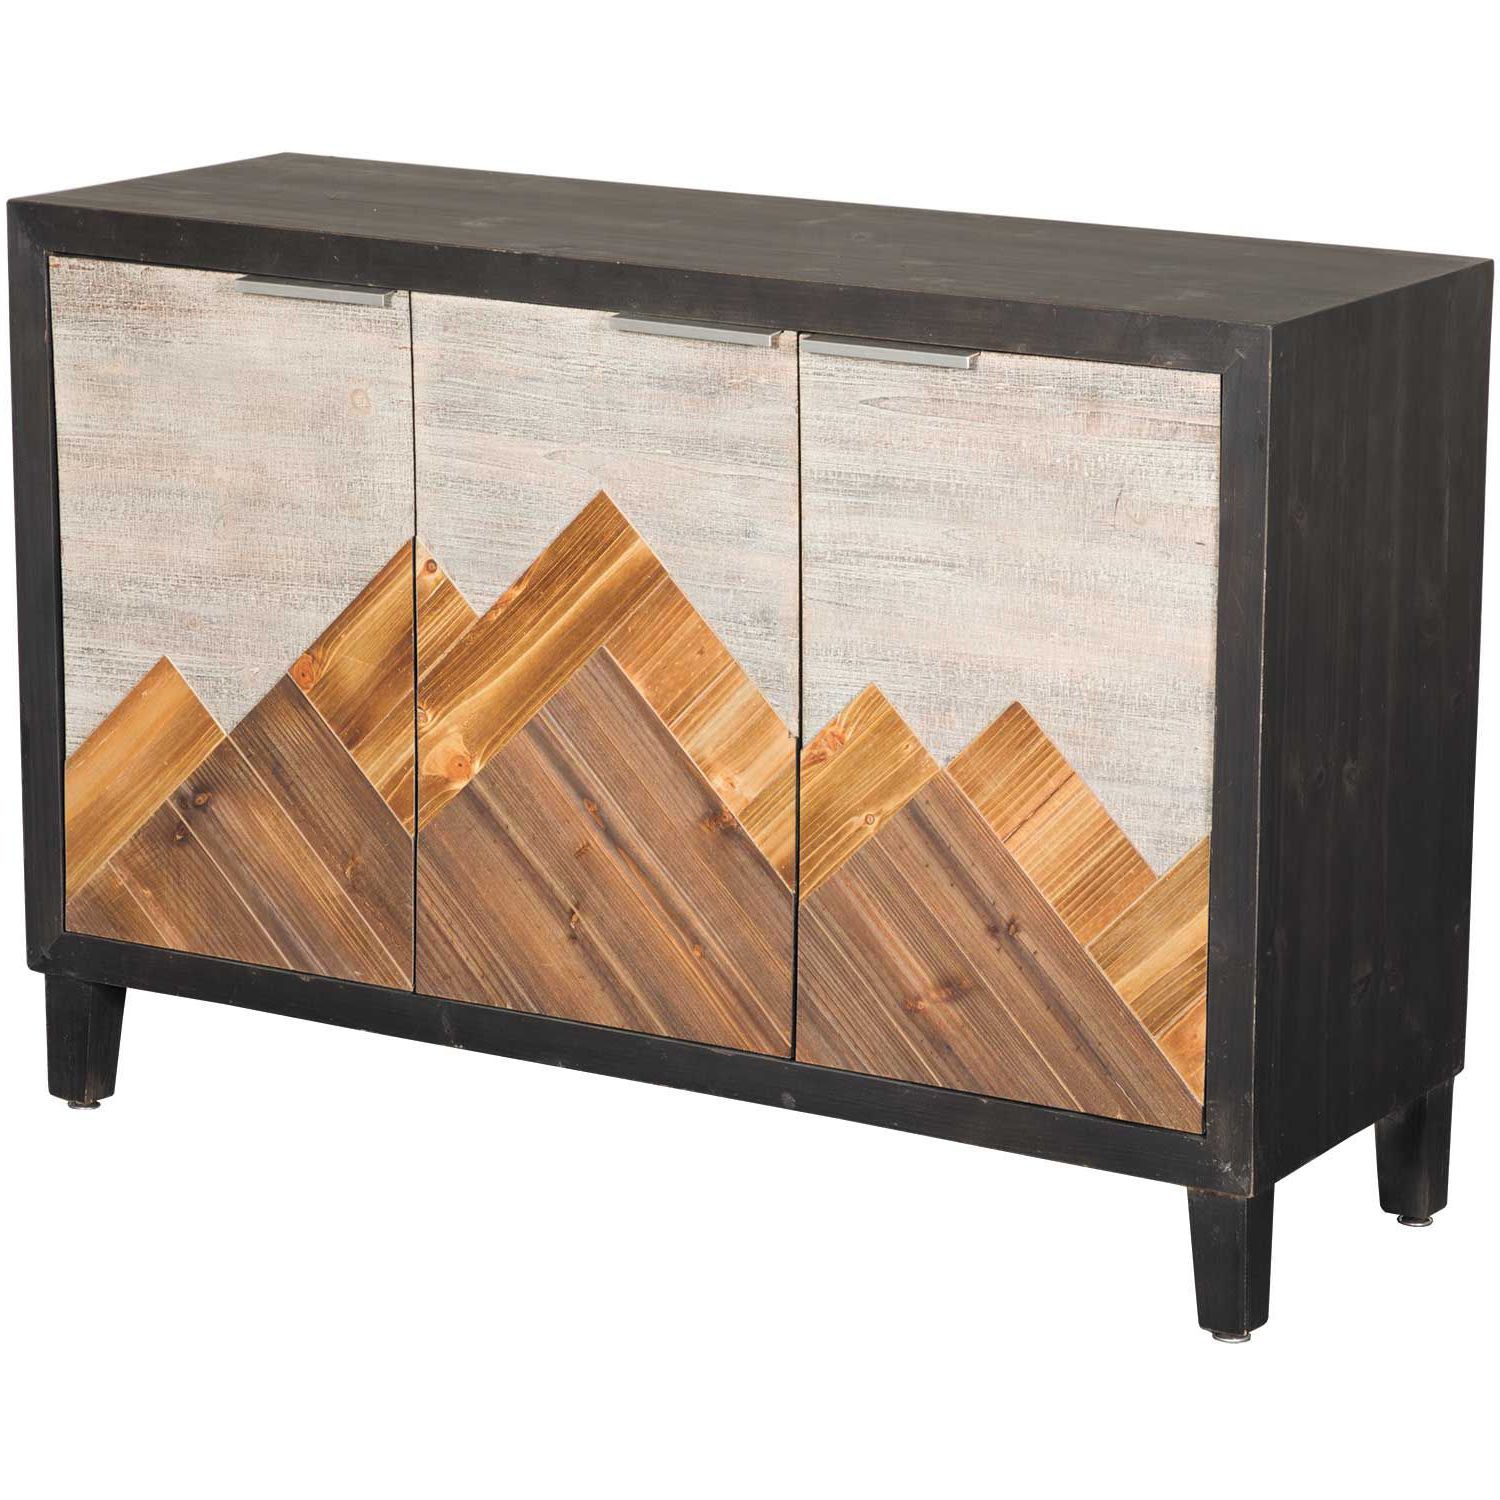 Mountain 3 Door Accent Cabinet | Home Accents | Afw Intended For 3 Door Accent Cabinet Sideboards (View 5 of 20)